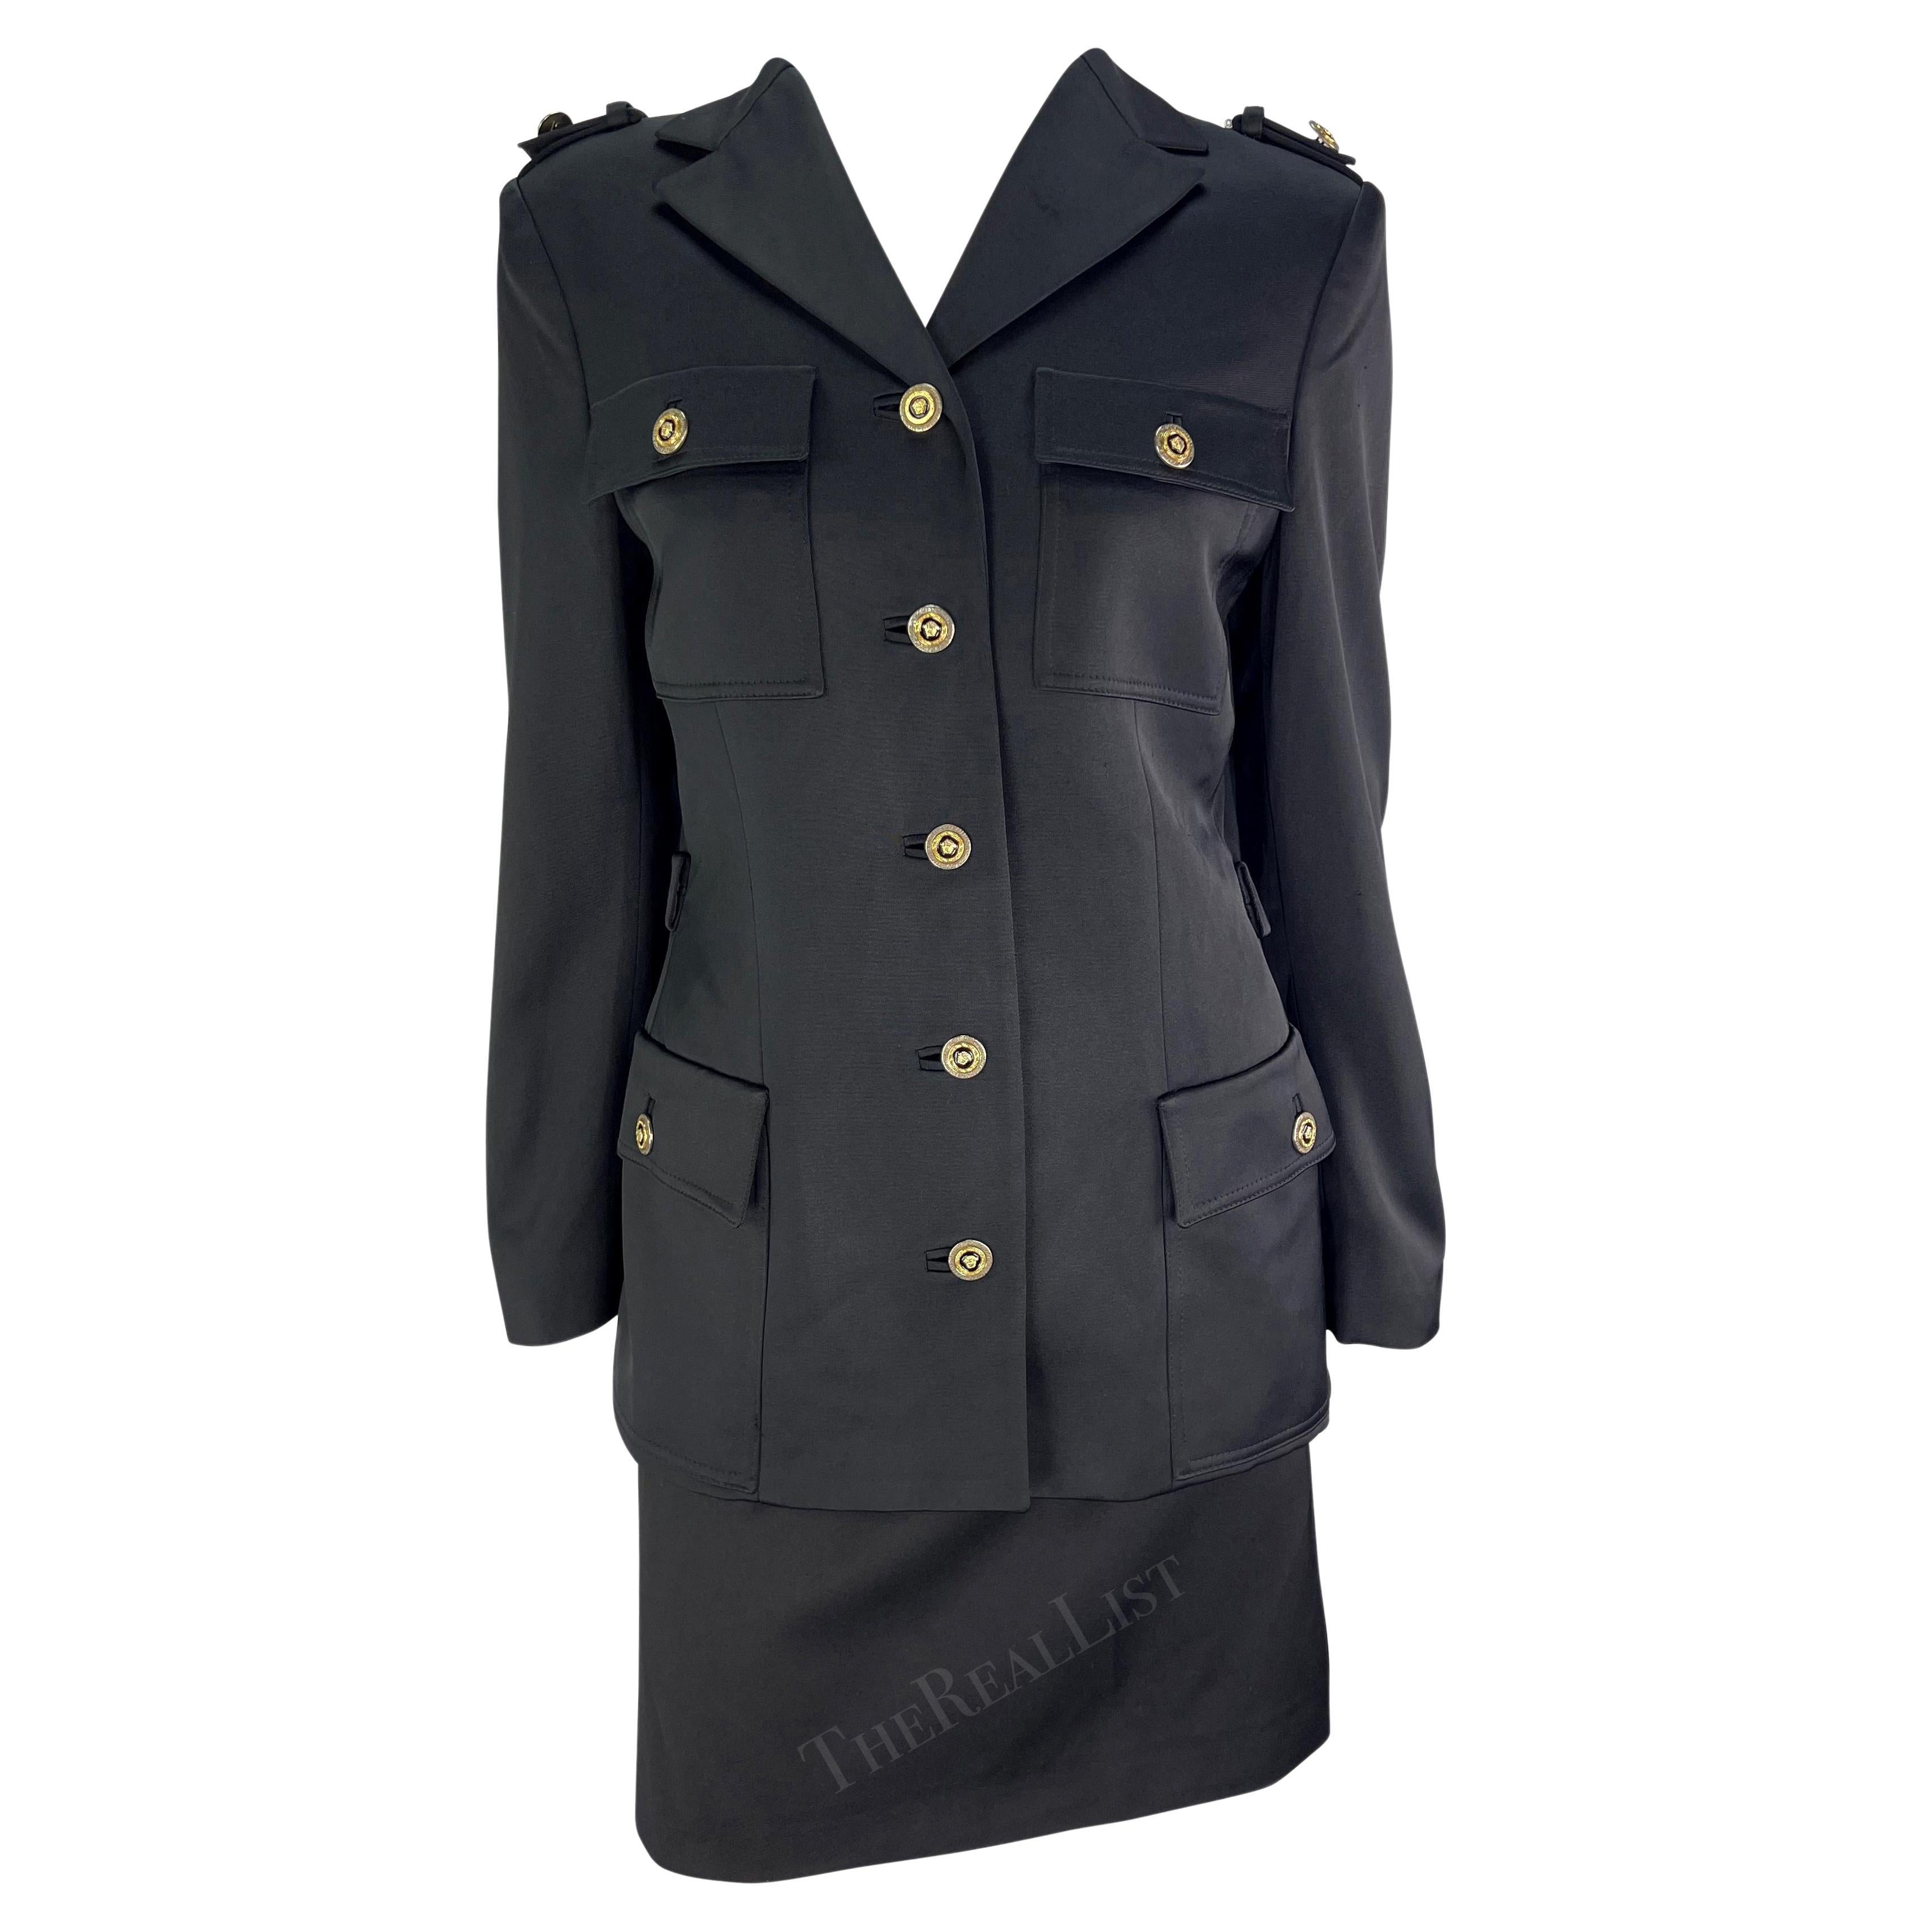 F/W 1996 Gianni Versace Black Military-Style Skirt Suit Set For Sale